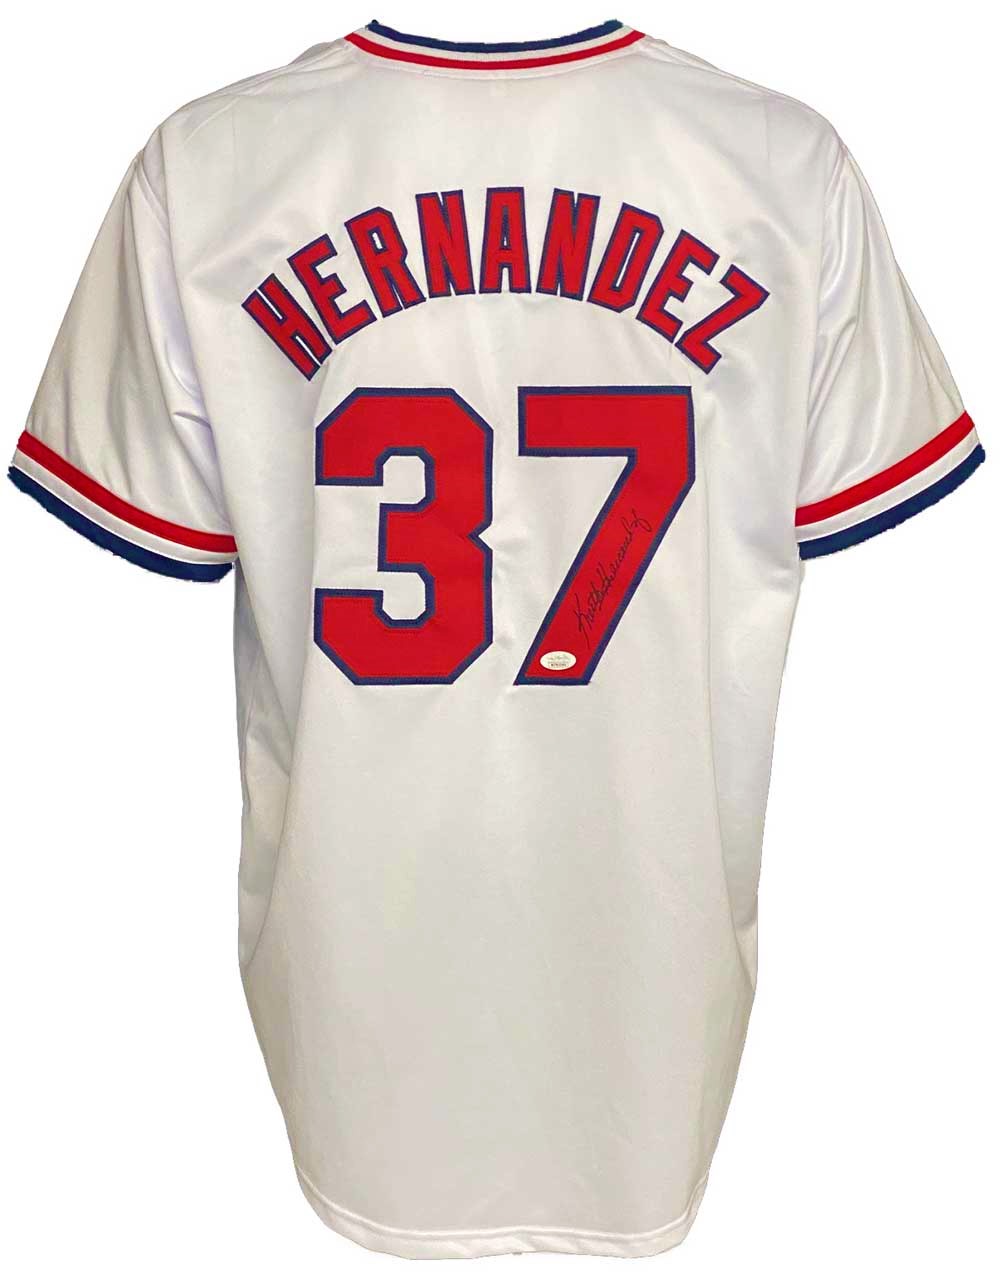 St. Louis Cardinals Keith Hernandez Autographed Pro Style White